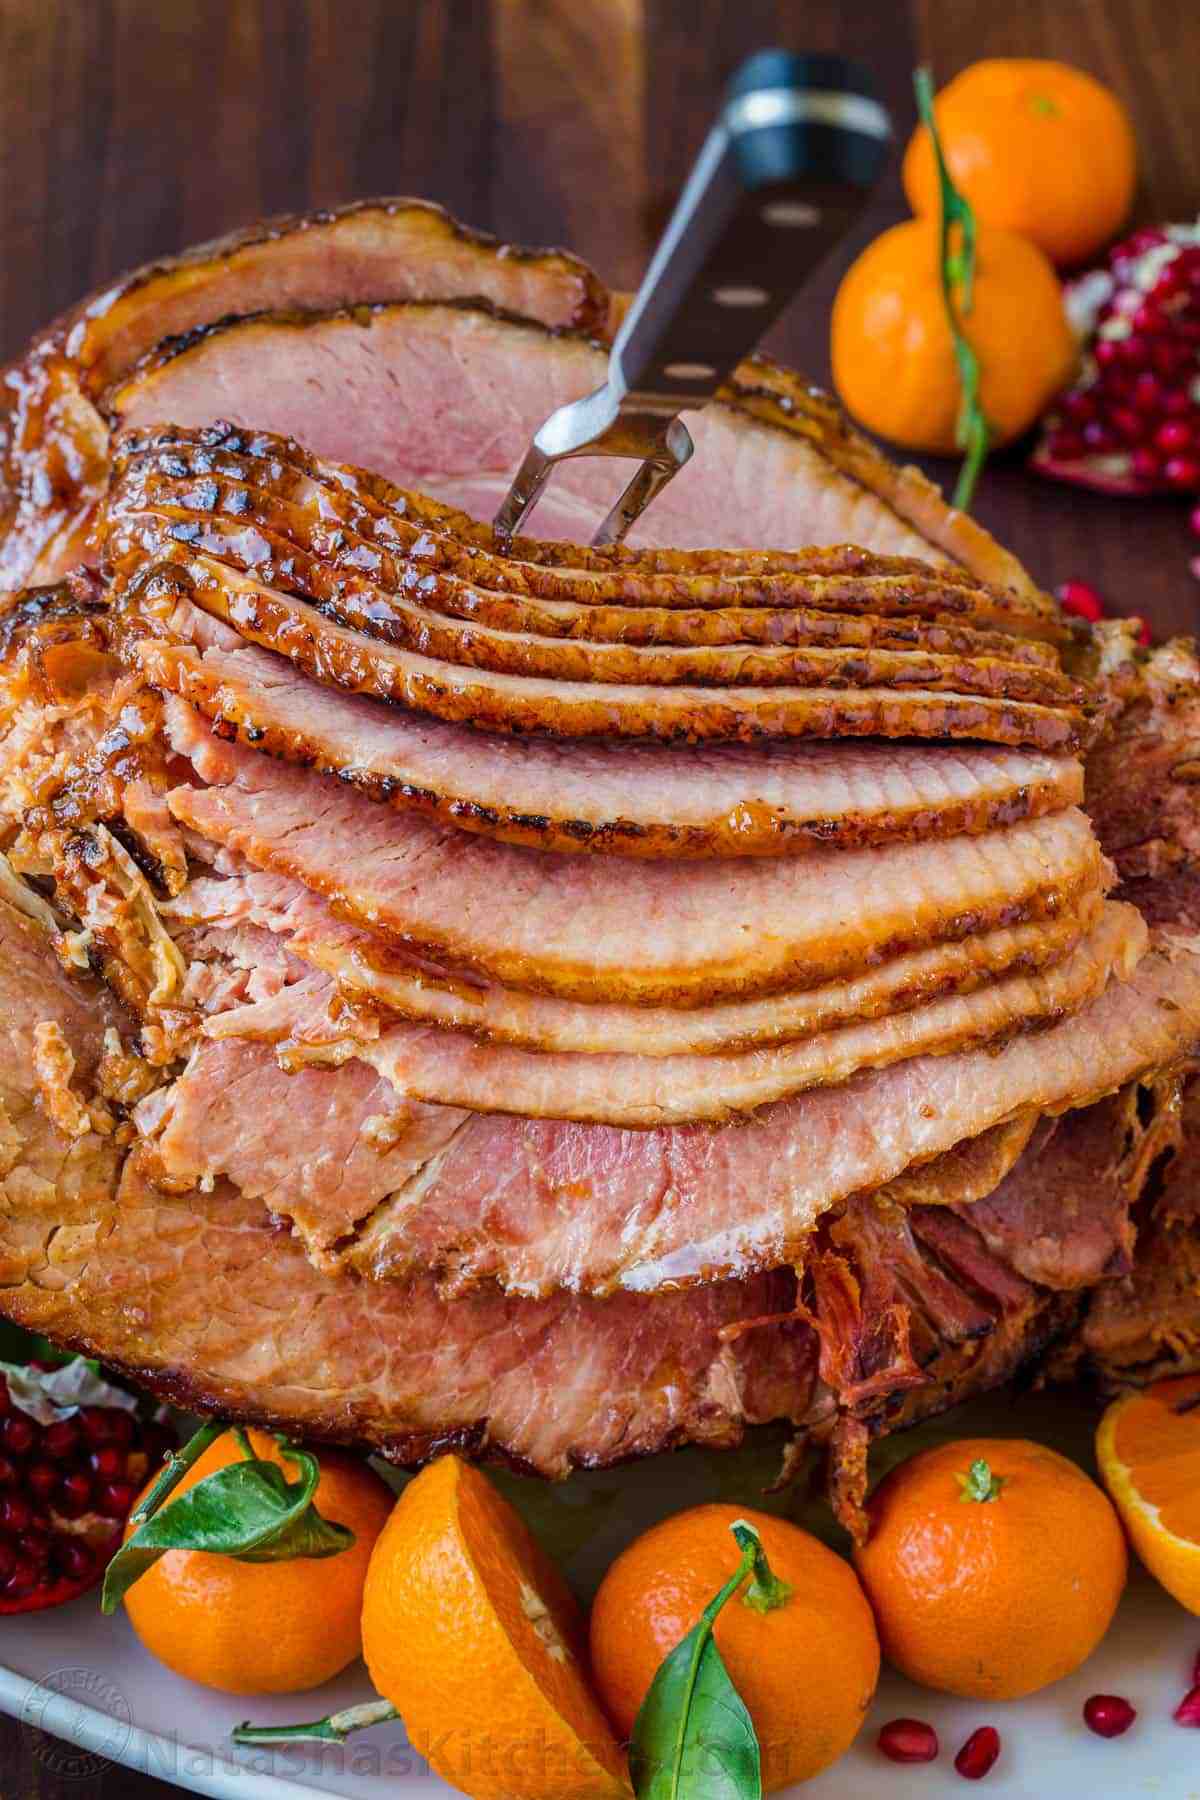 Can you eat store bought ham cold?